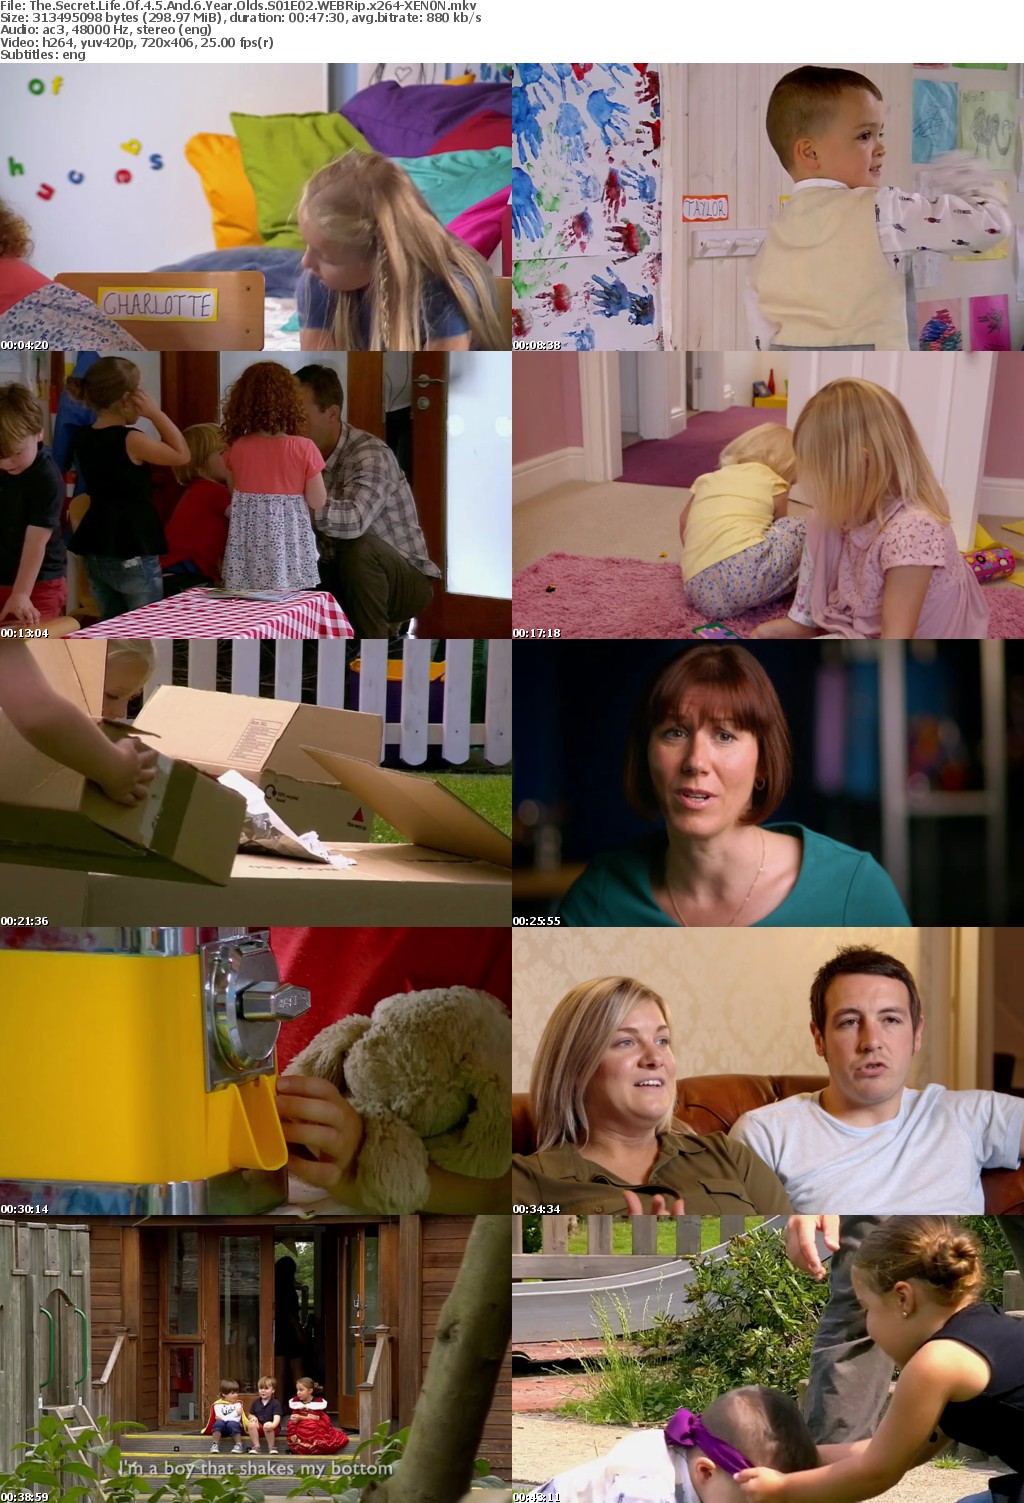 The Secret Life Of 4 5 And 6 Year Olds S01E02 WEBRip x264-XEN0N